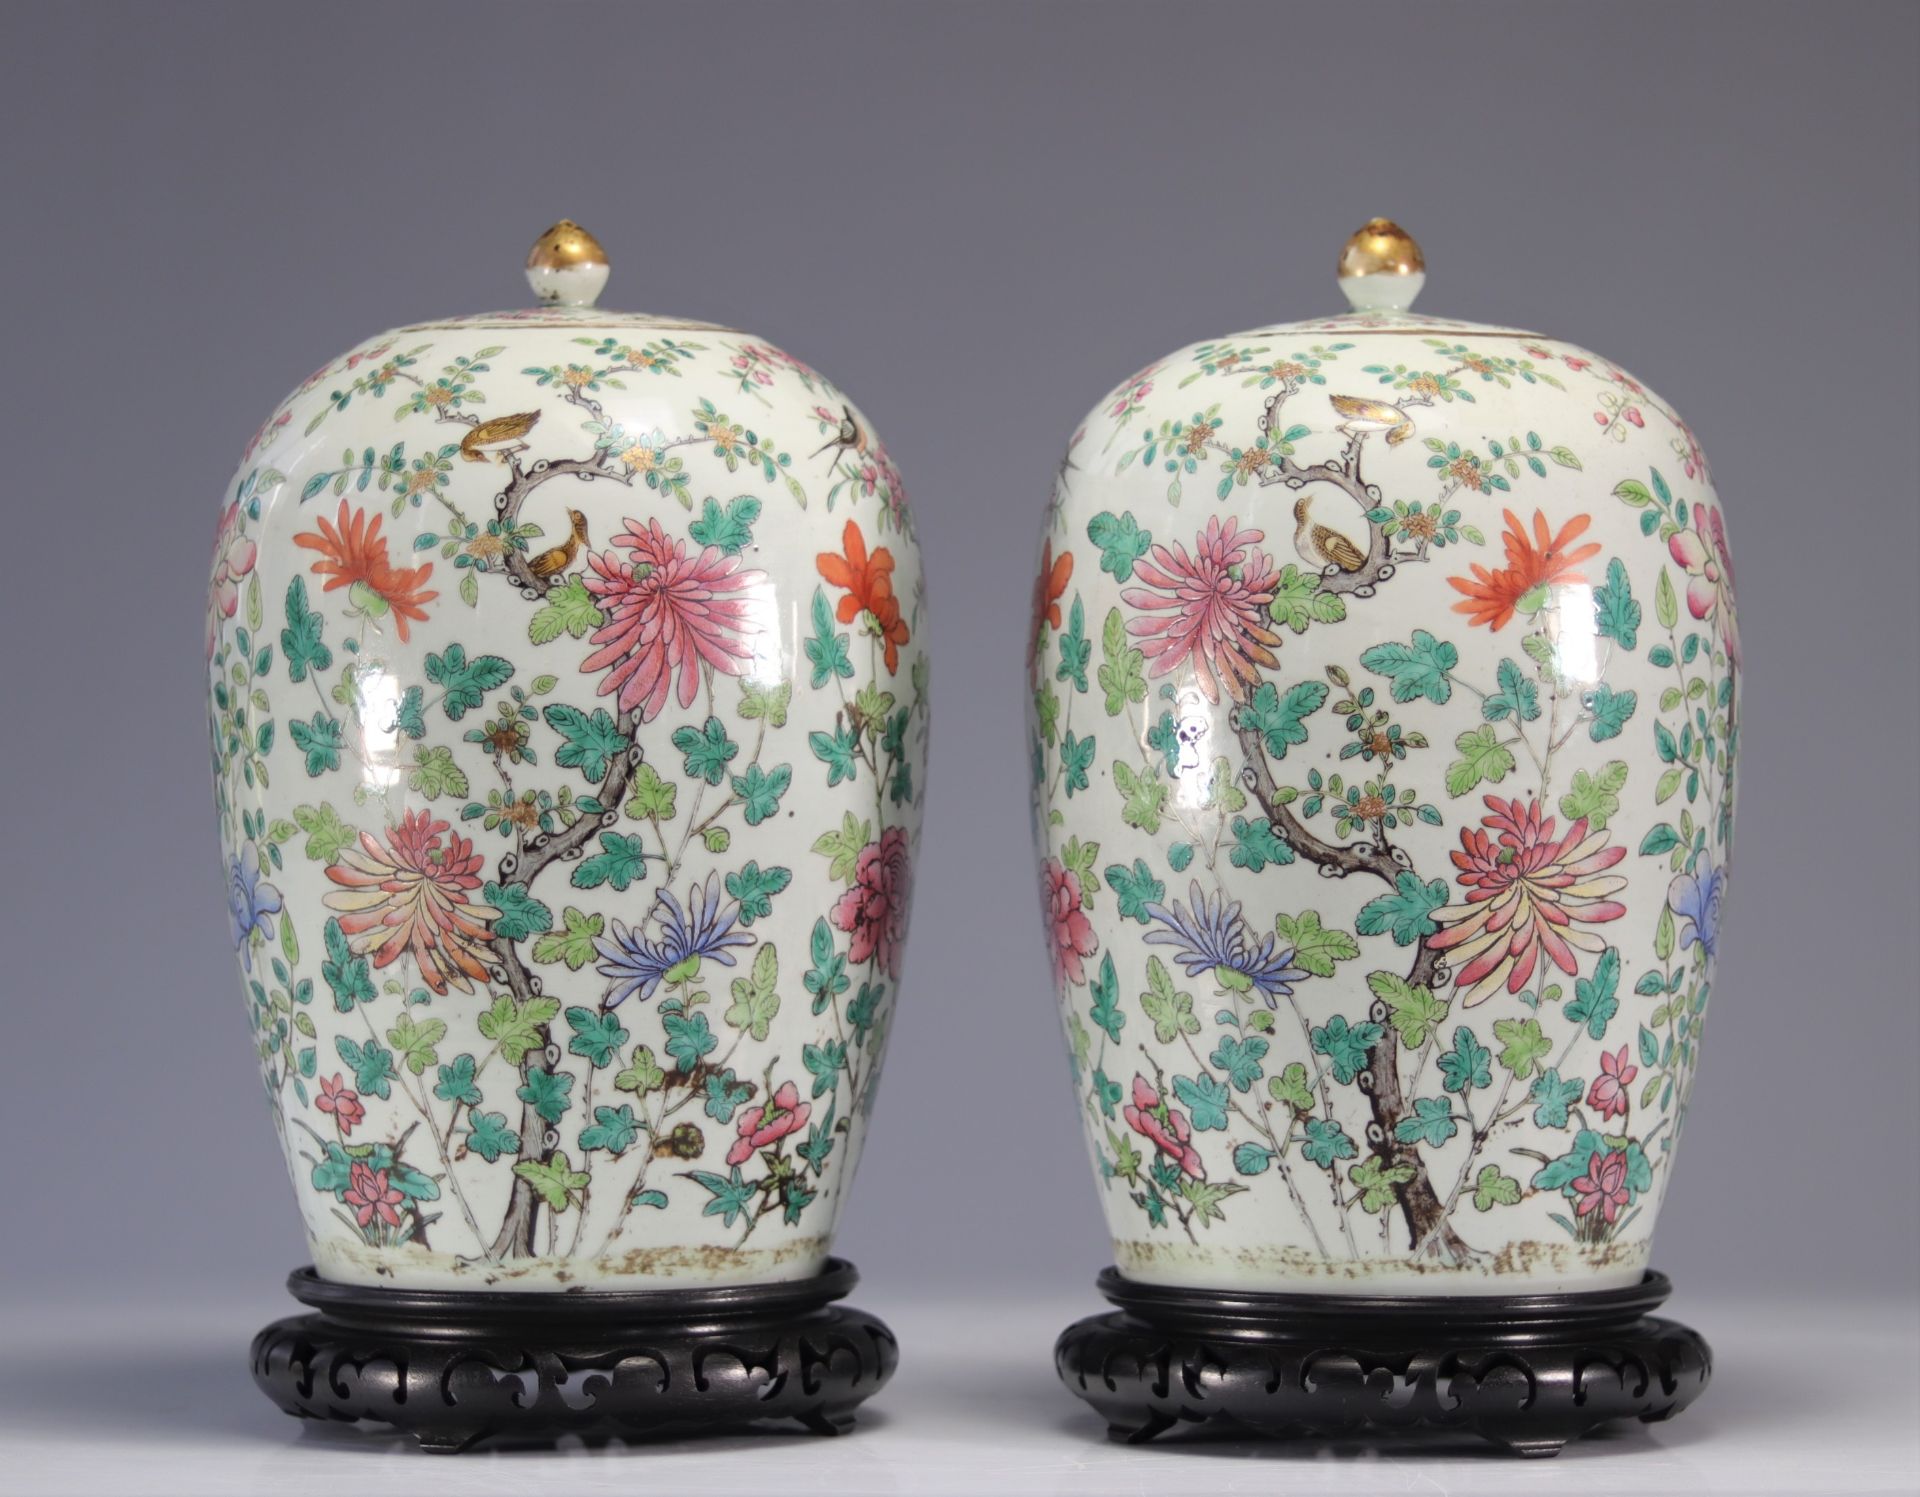 Pair of covered vases in famille rose porcelain with floral and bird decoration - Image 2 of 5